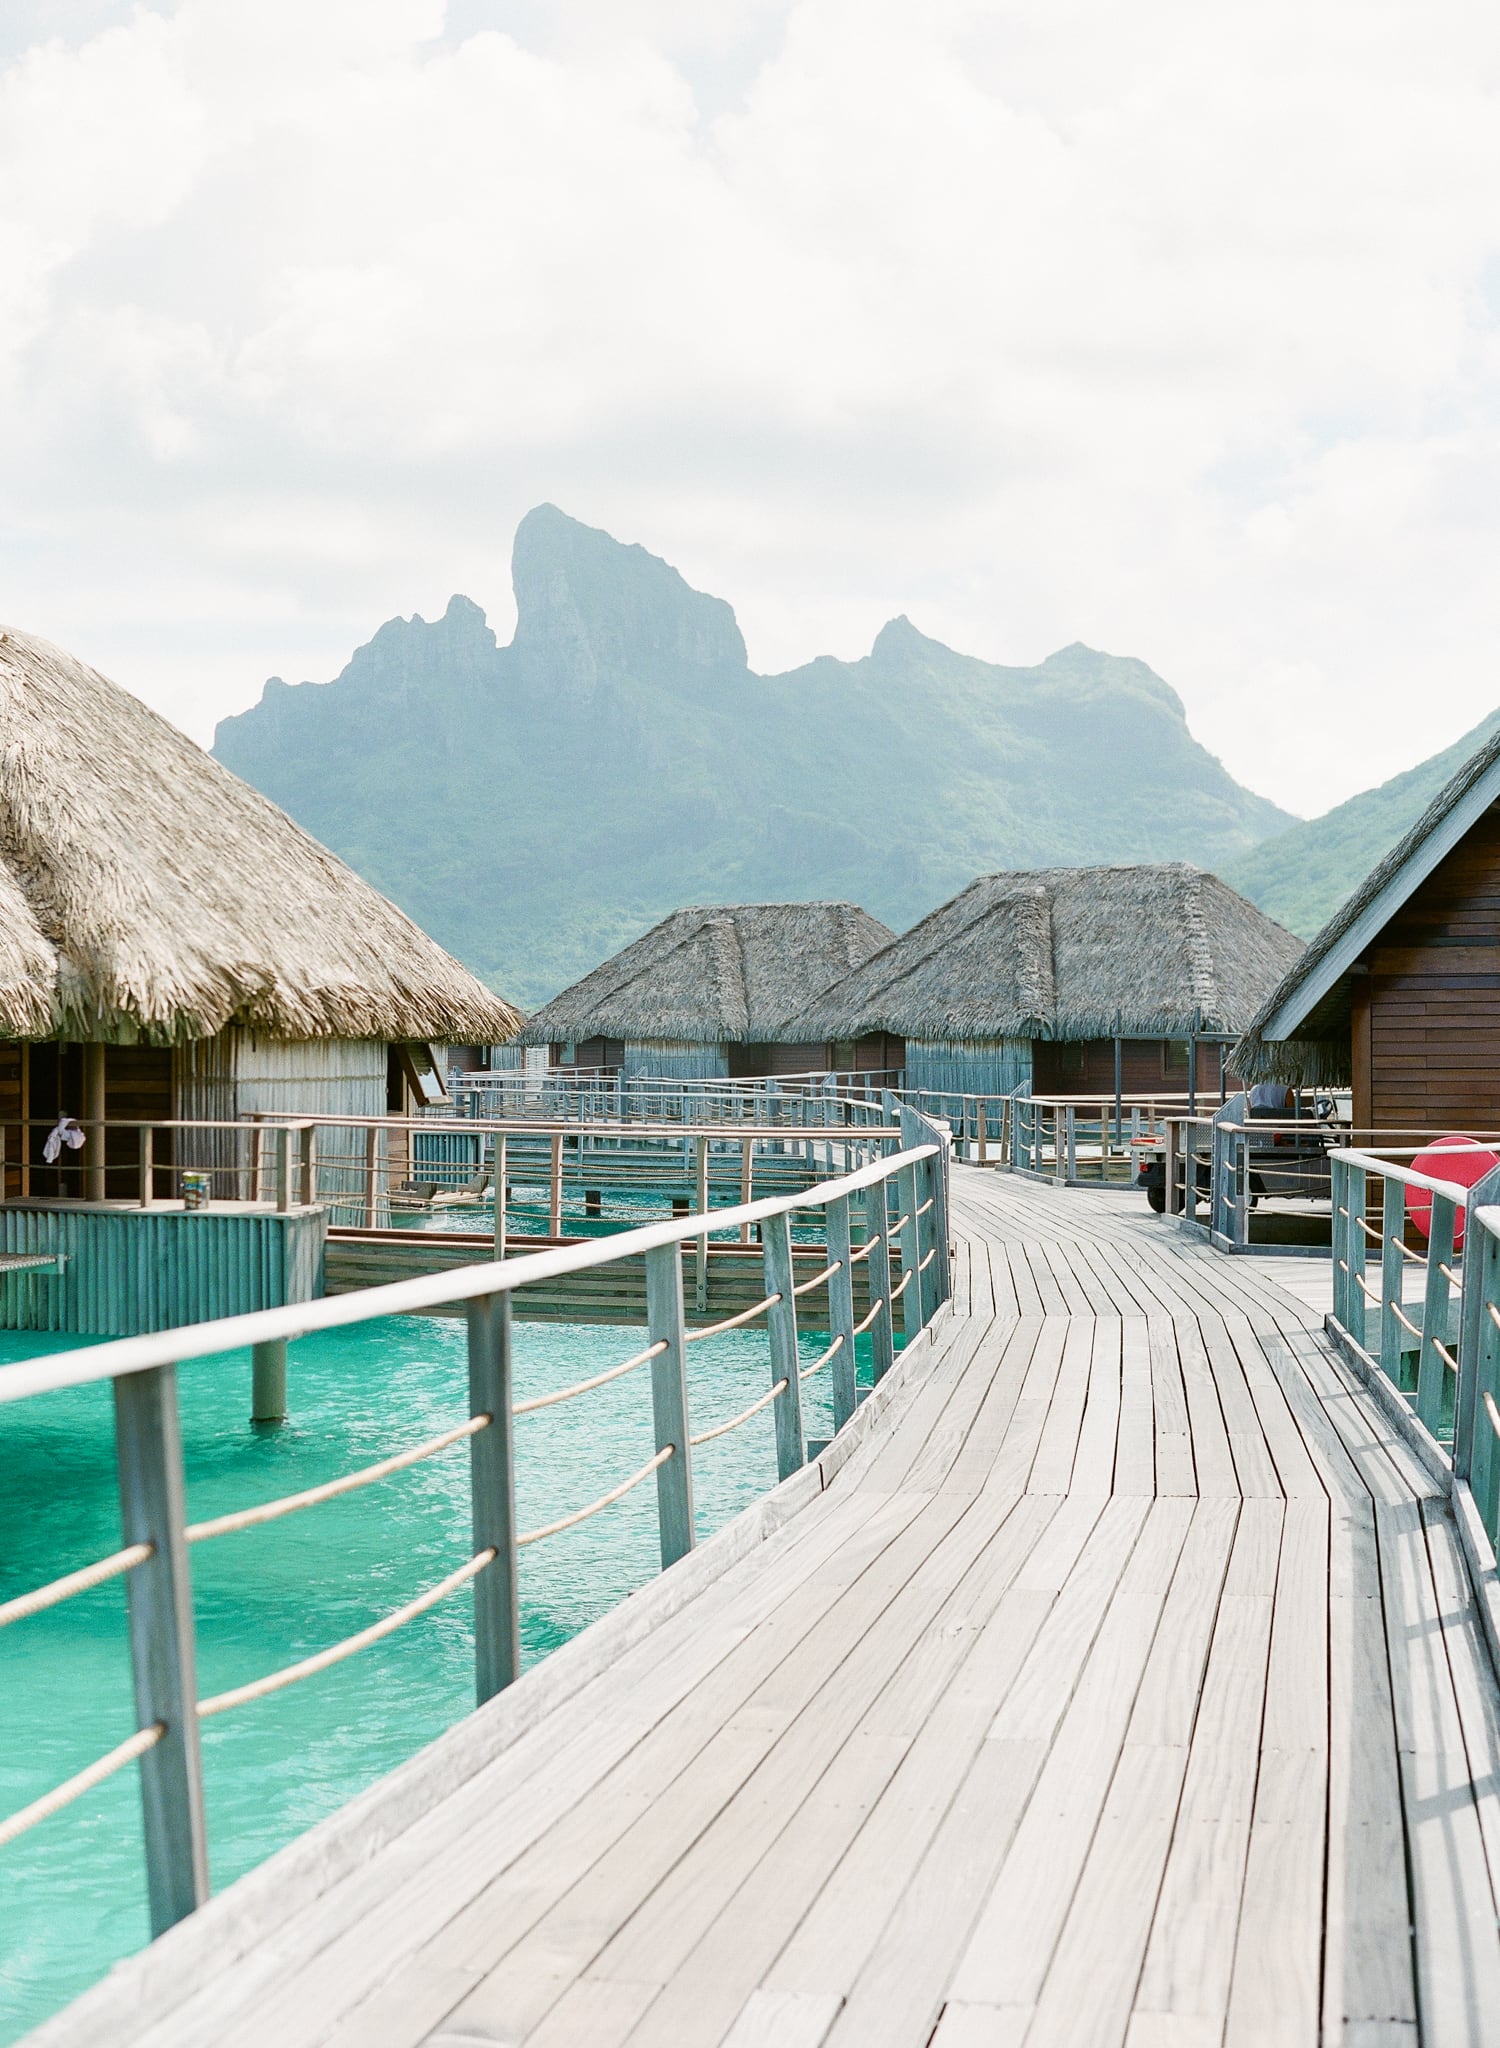 View with the overwater bungalow, the path in the Four Seasons Bora Bora